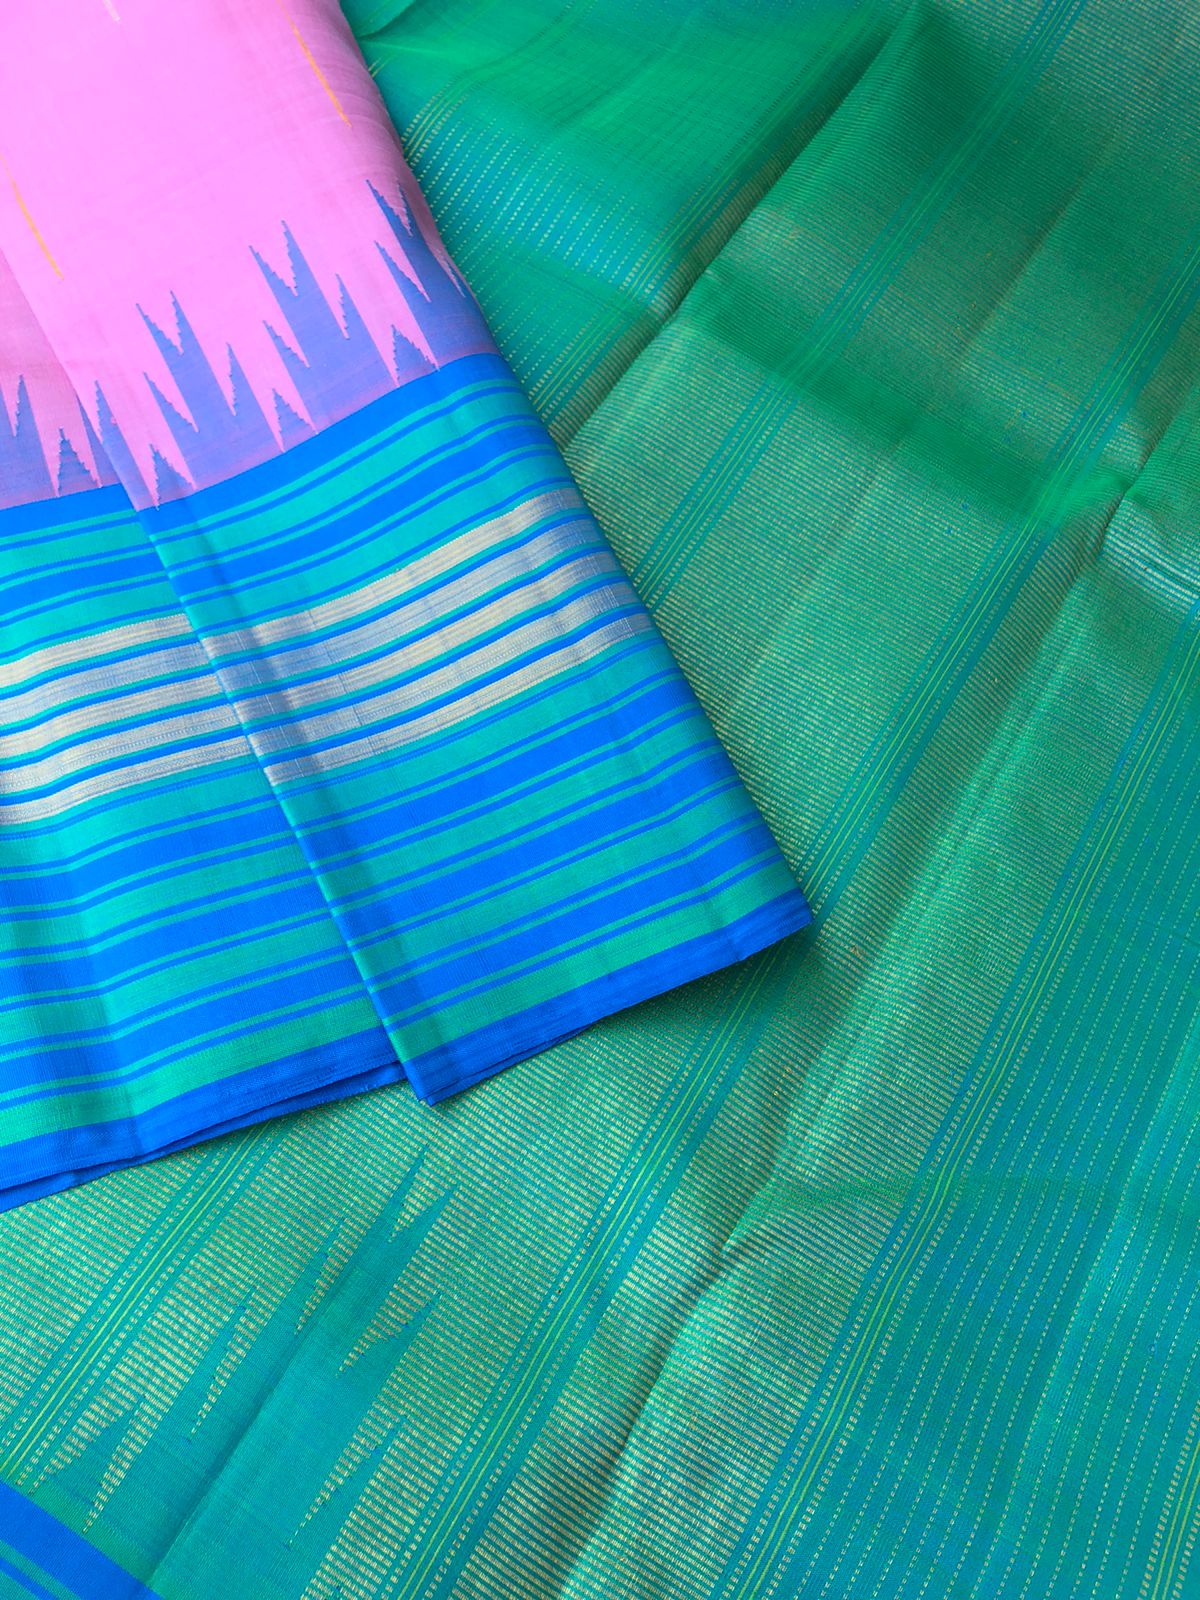 Korvai stories on authentic Kanchivaram - beautiful bubble gum pink and dual tone aqua blue green a stunner korvai Kanchivaram with silver and gold zari woven rain drops woven body